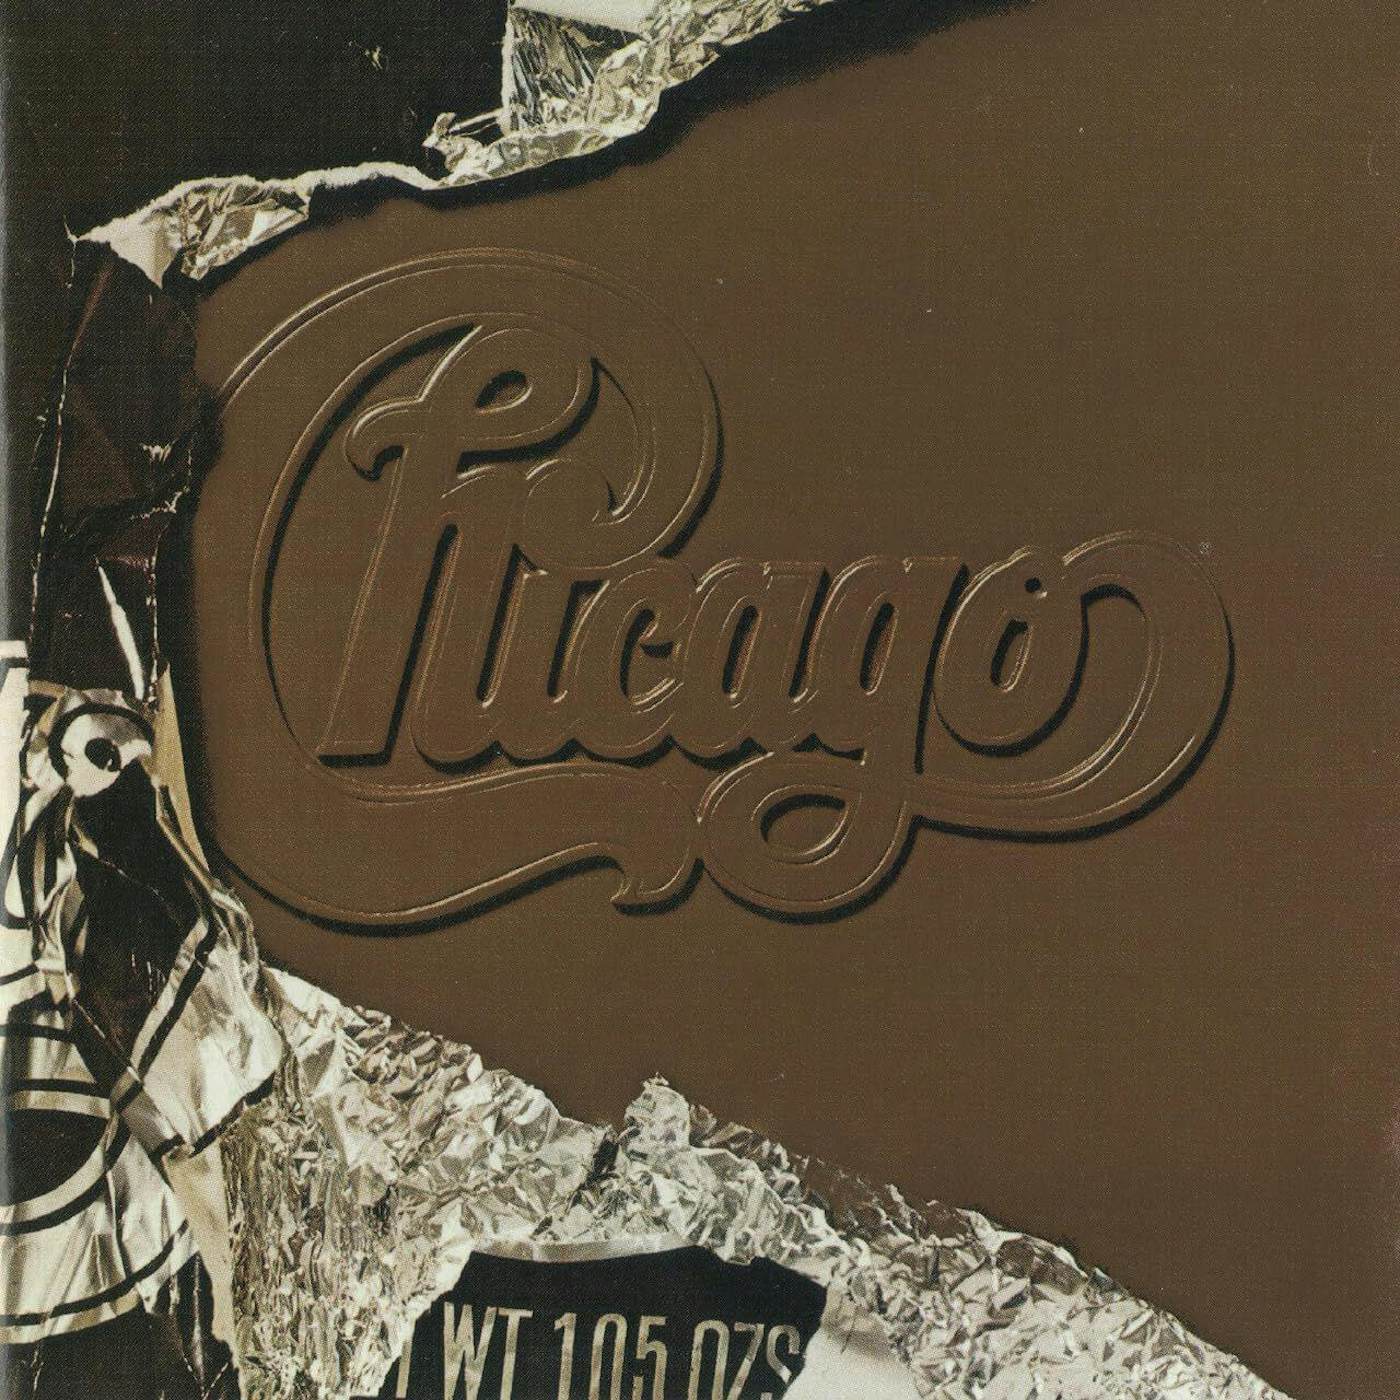  Chicago X (Gold Anniversary/Limited) Vinyl Record